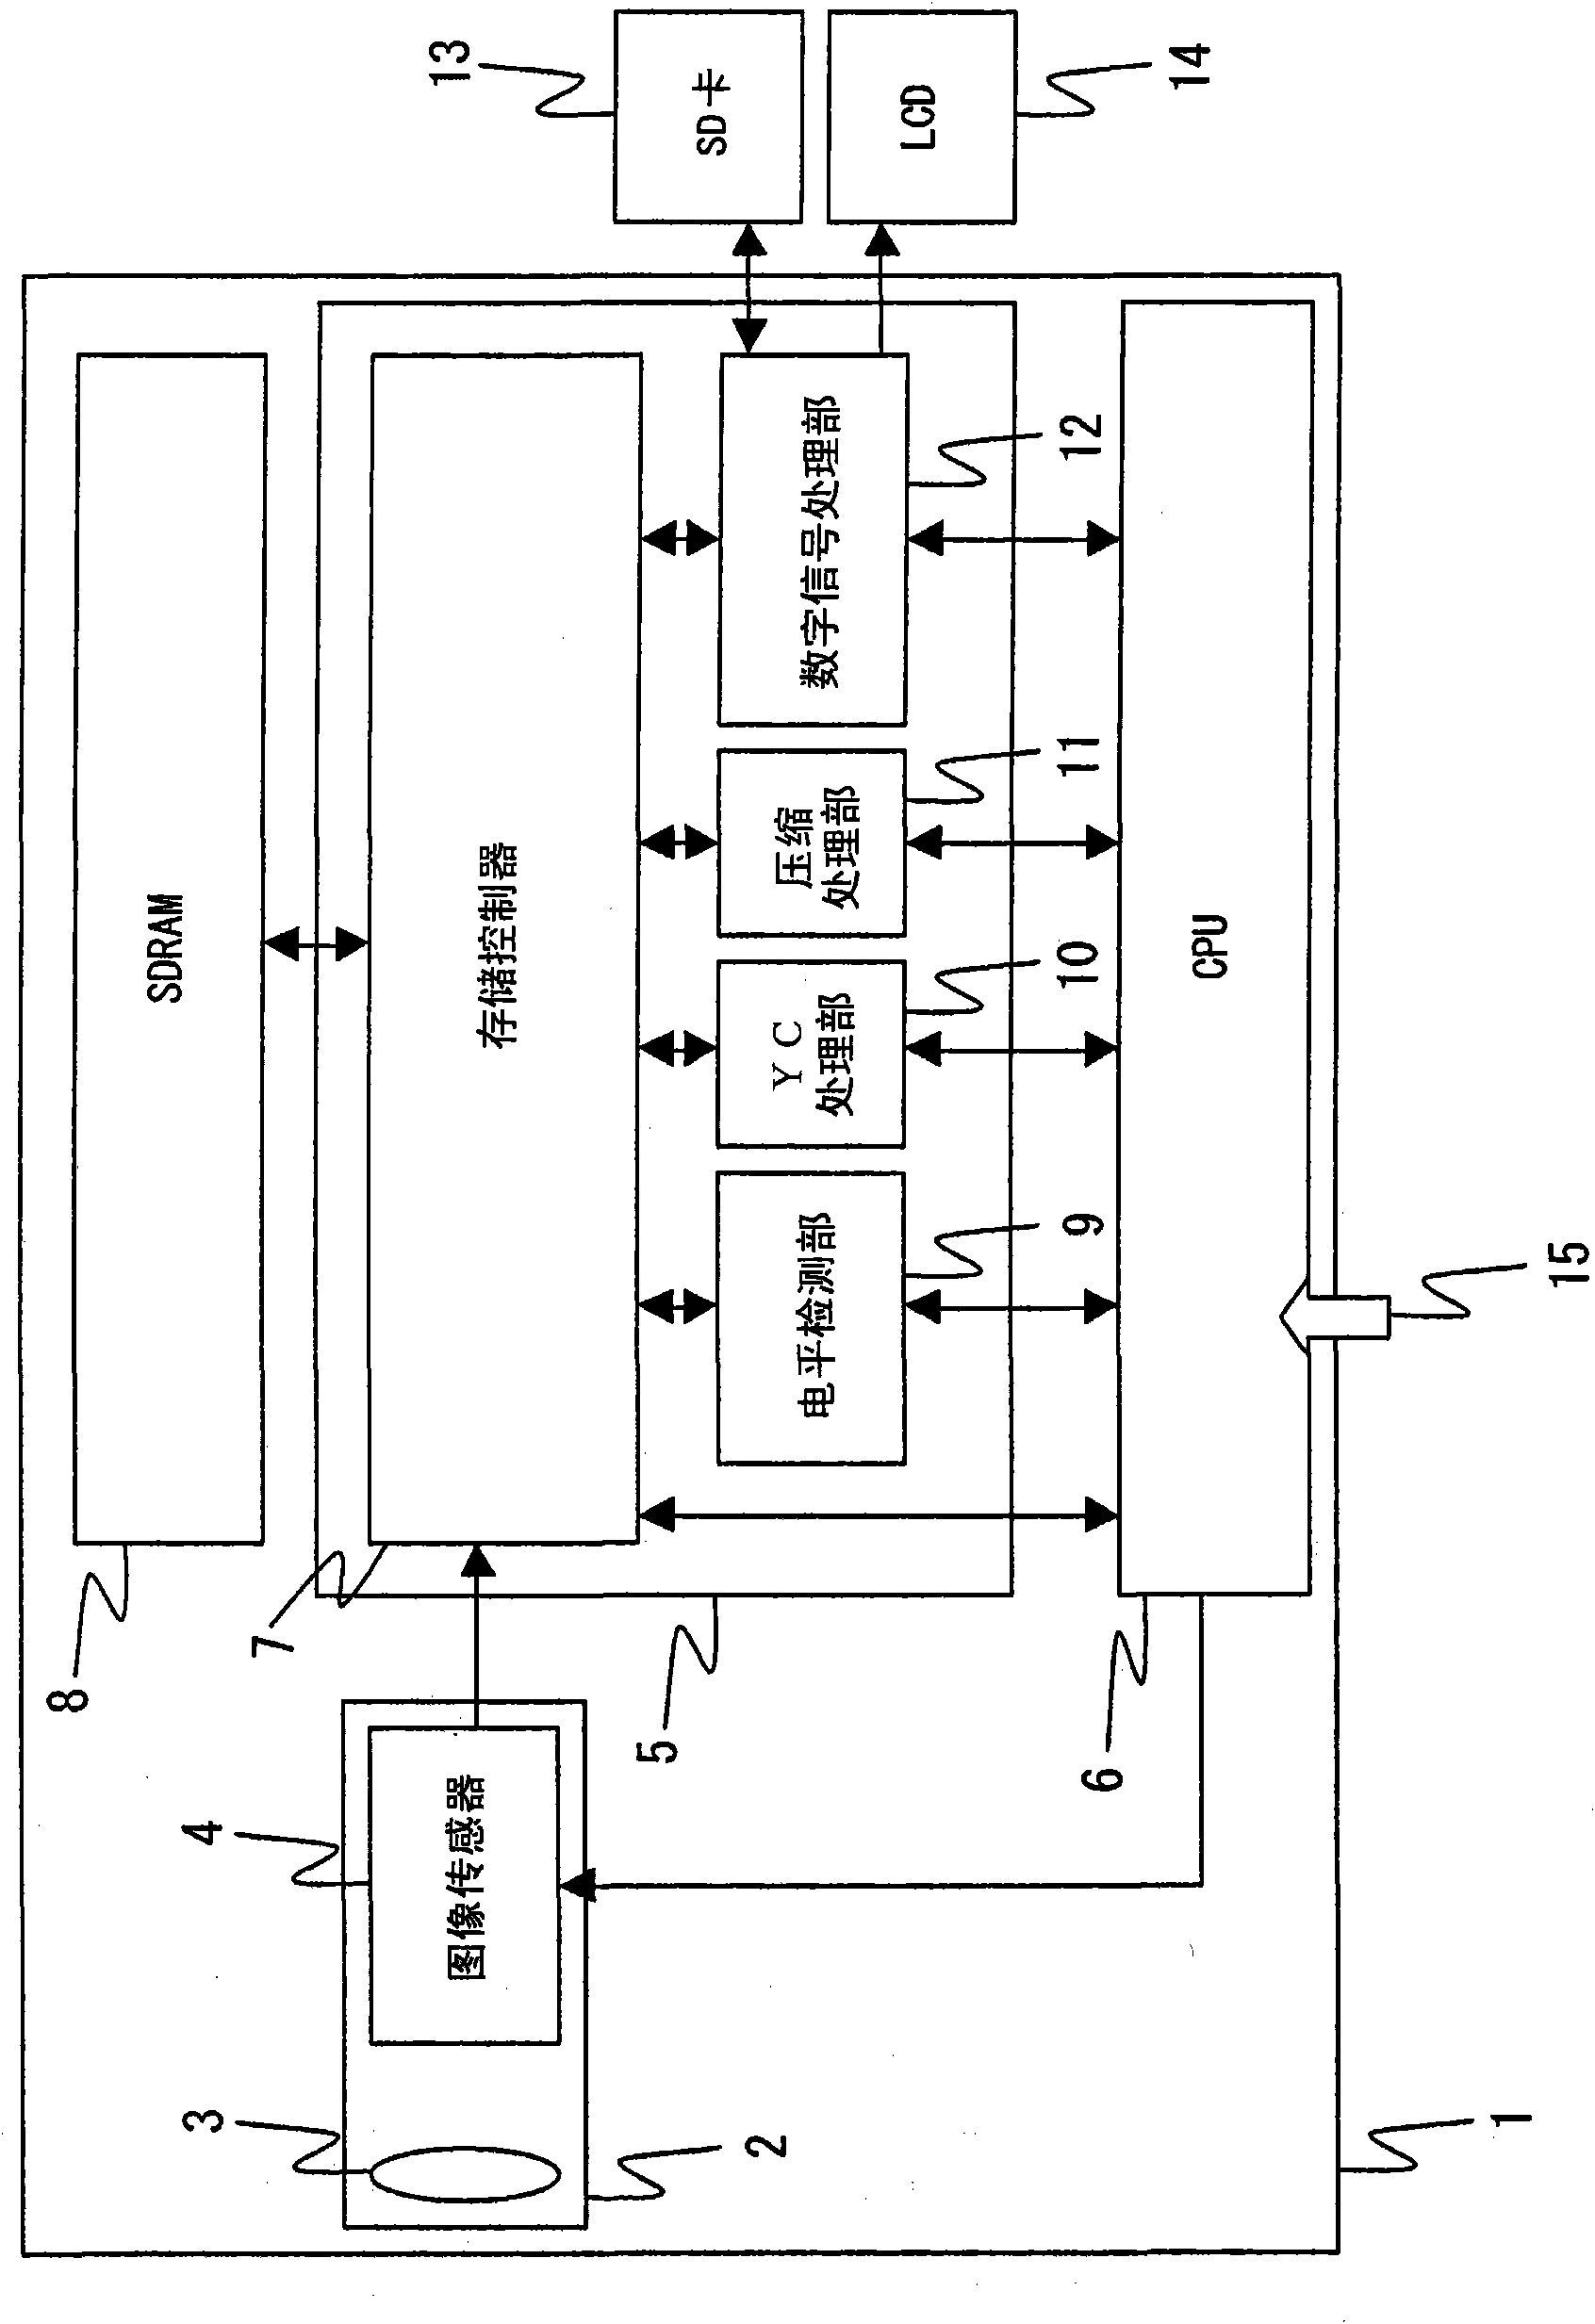 Imaging device, imaging module, electronic still camera, and electronic movie camera